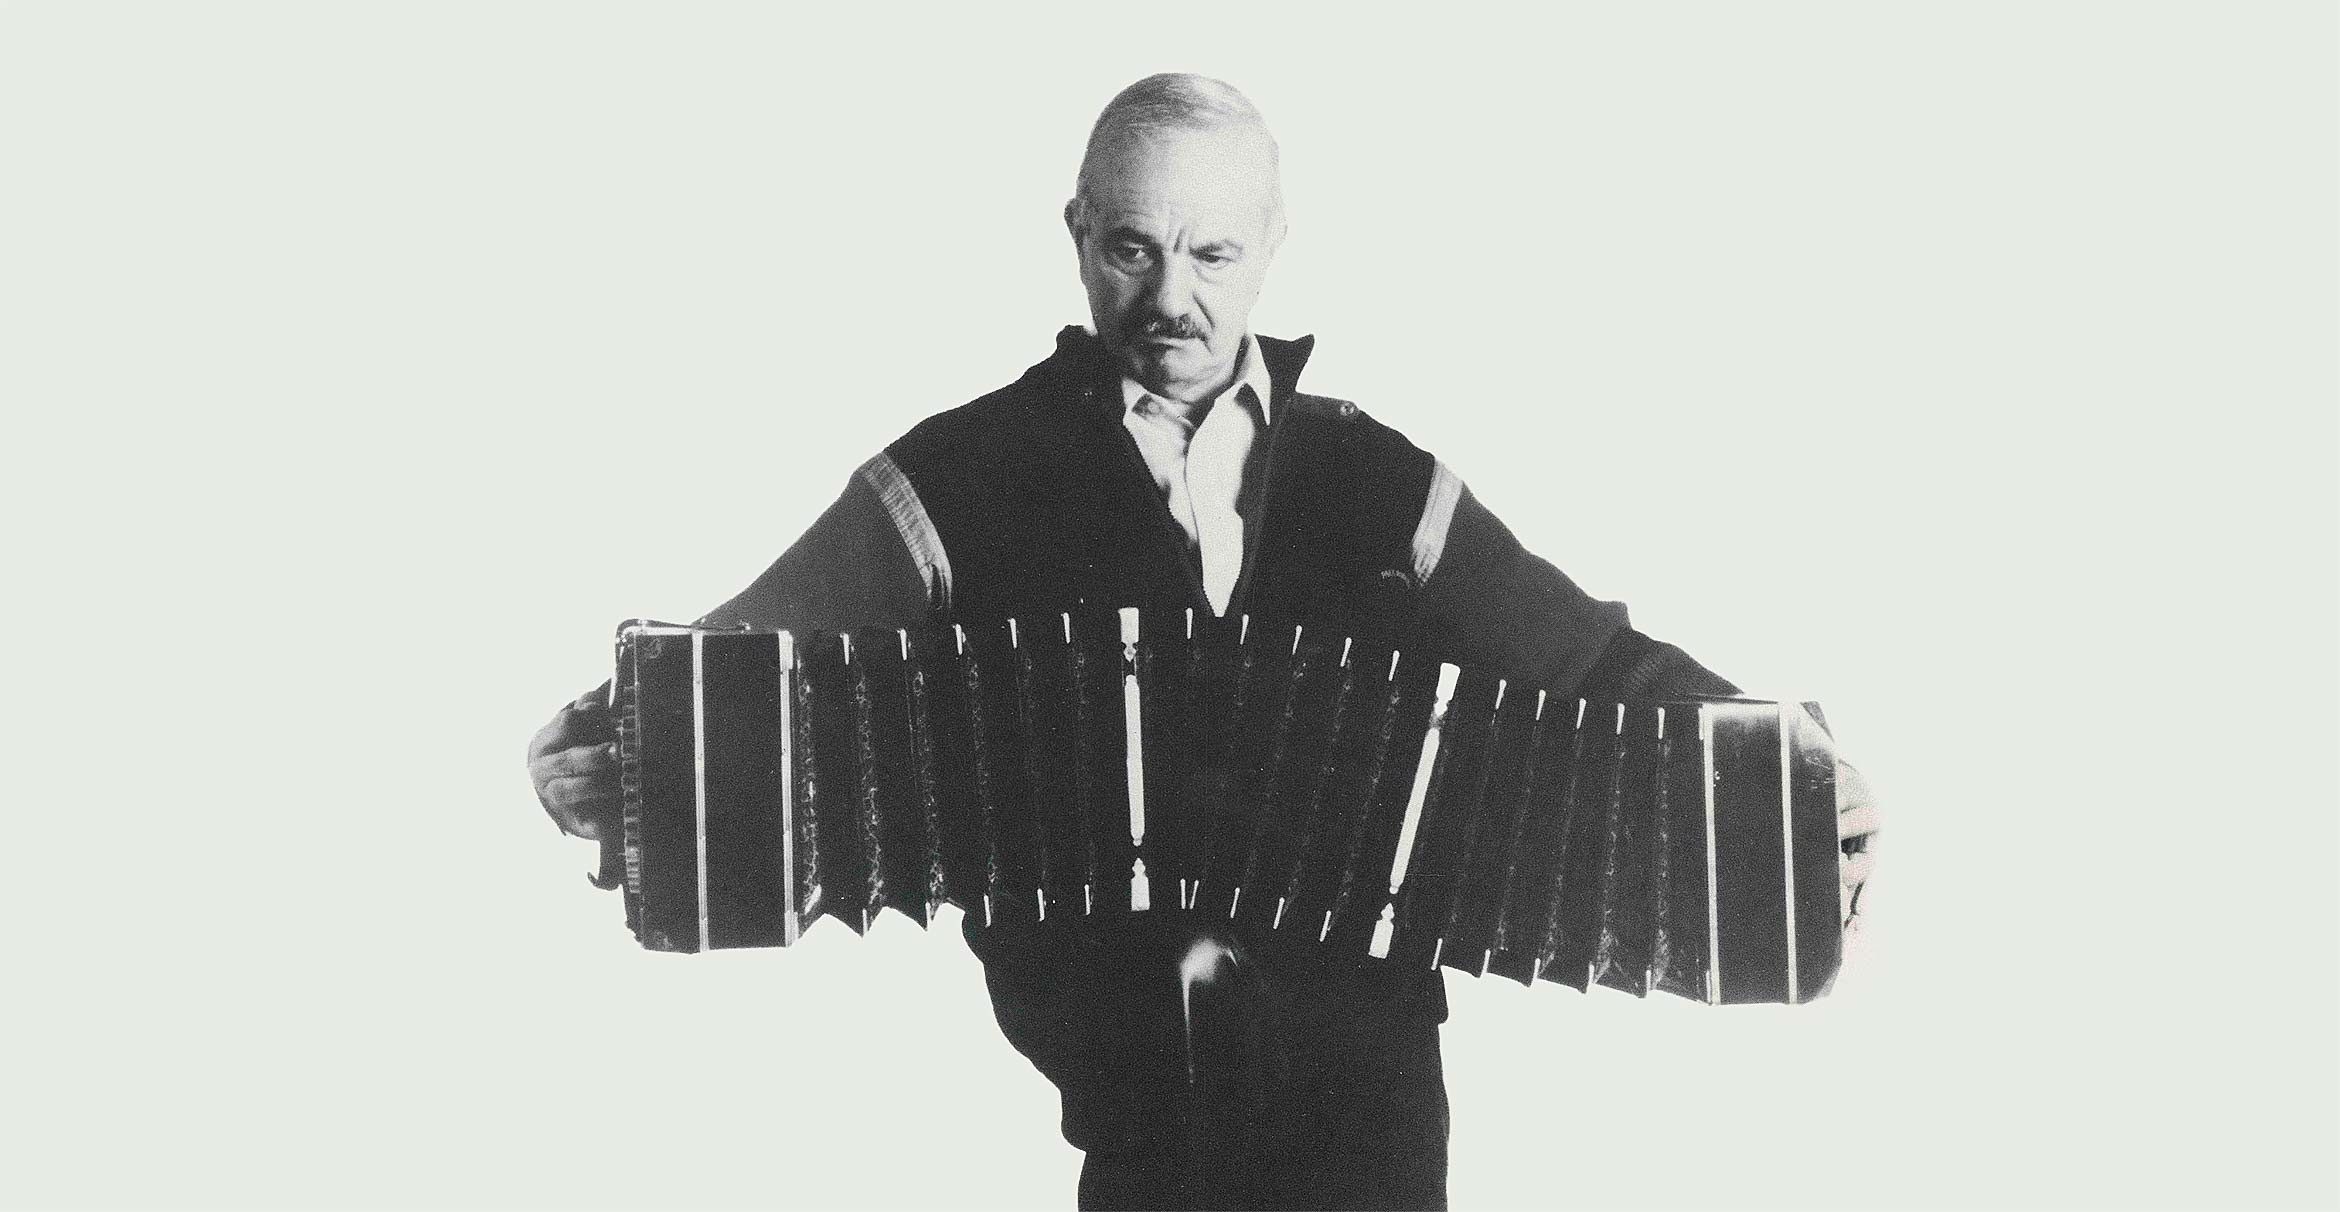 Vast tango archive of Argentine composer Astor Piazzolla funded for preservation; Photo: Astor Piazzolla playing the bandoneón"